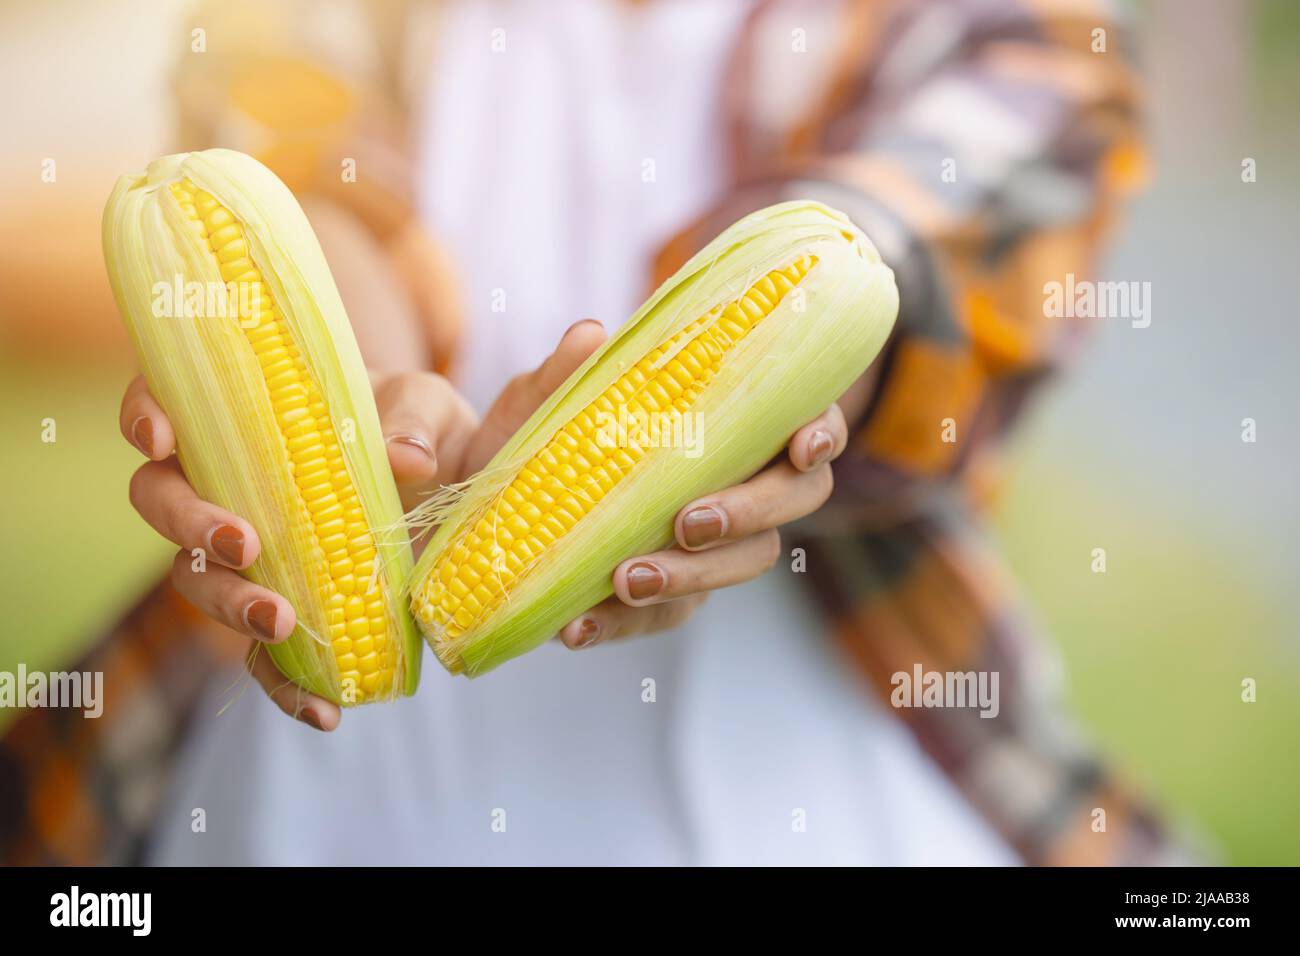 corn sweet crop in farmer hand, recommend healthy food source of fiber and high vitamin for morning meal Stock Photo